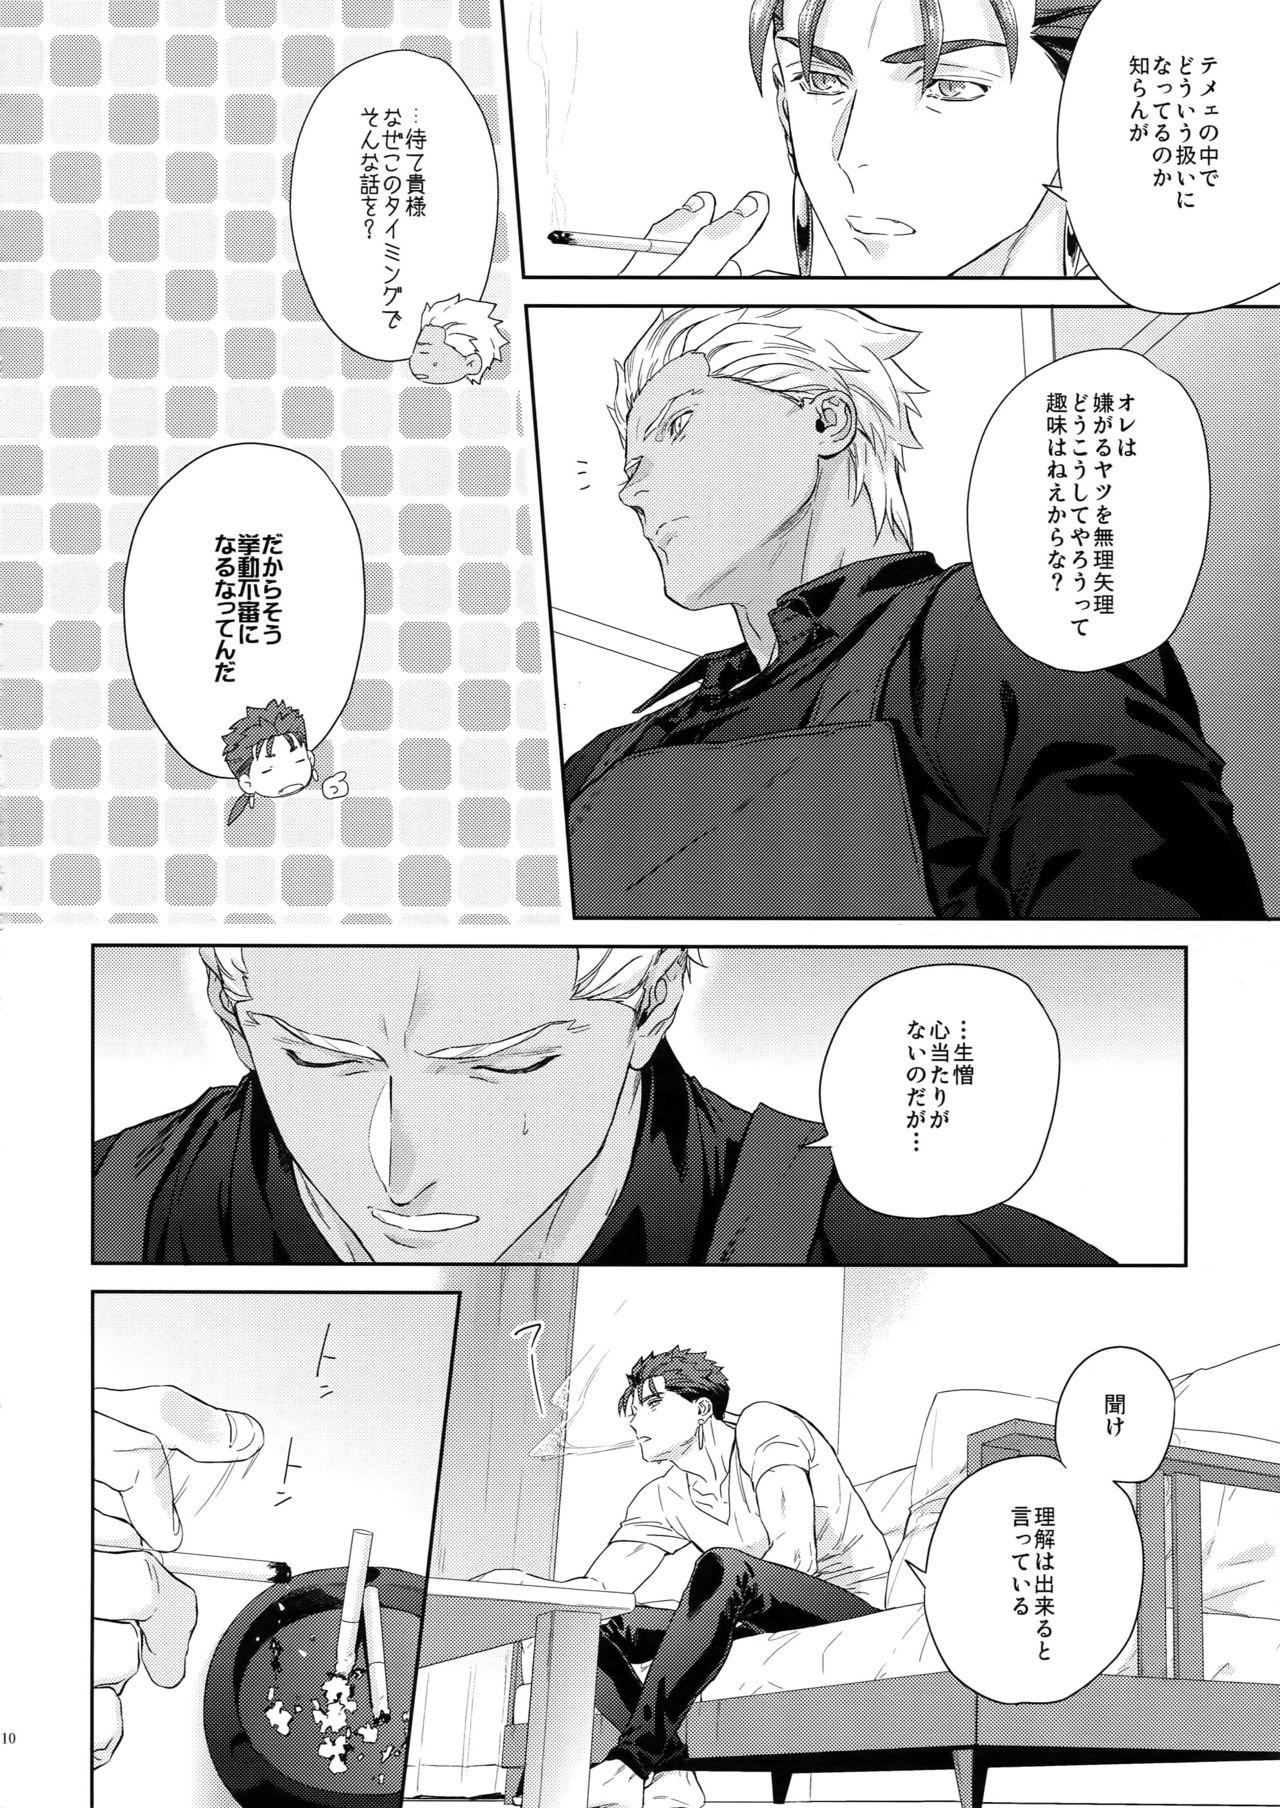 Female parfum - Fate stay night Blow Job - Page 9